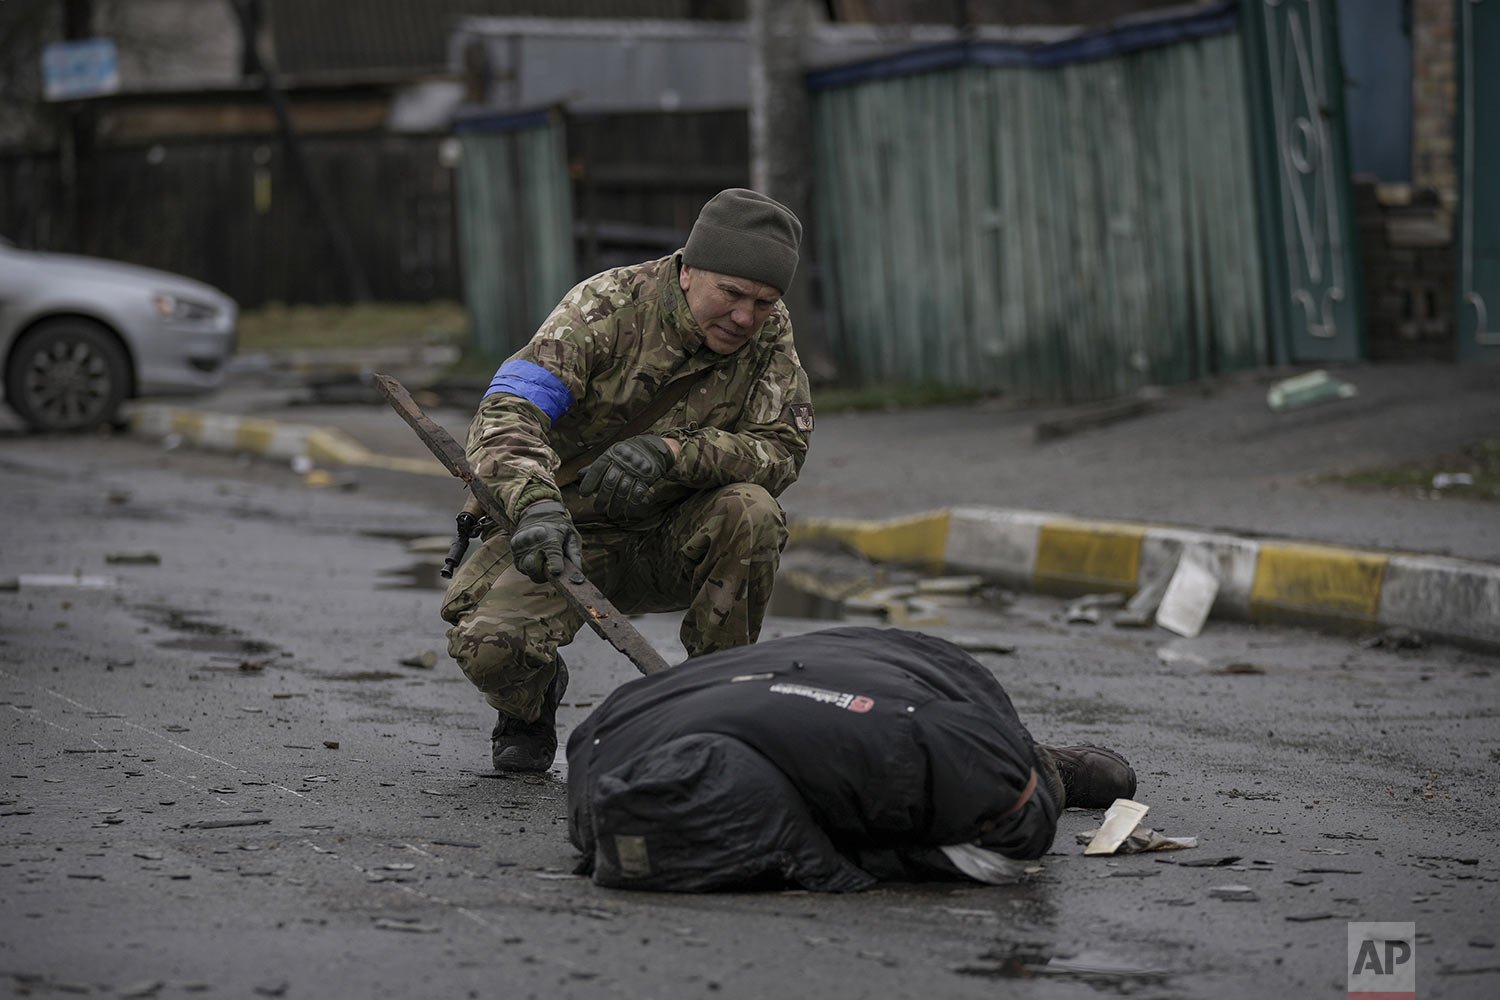  A Ukrainian serviceman uses a piece of wood  to check if the body of a man dressed in civilian clothing is booby-trapped with explosive devices, in the formerly Russian-occupied Kyiv suburb of Bucha, Ukraine, Saturday, April 2, 2022. (AP Photo/Vadim